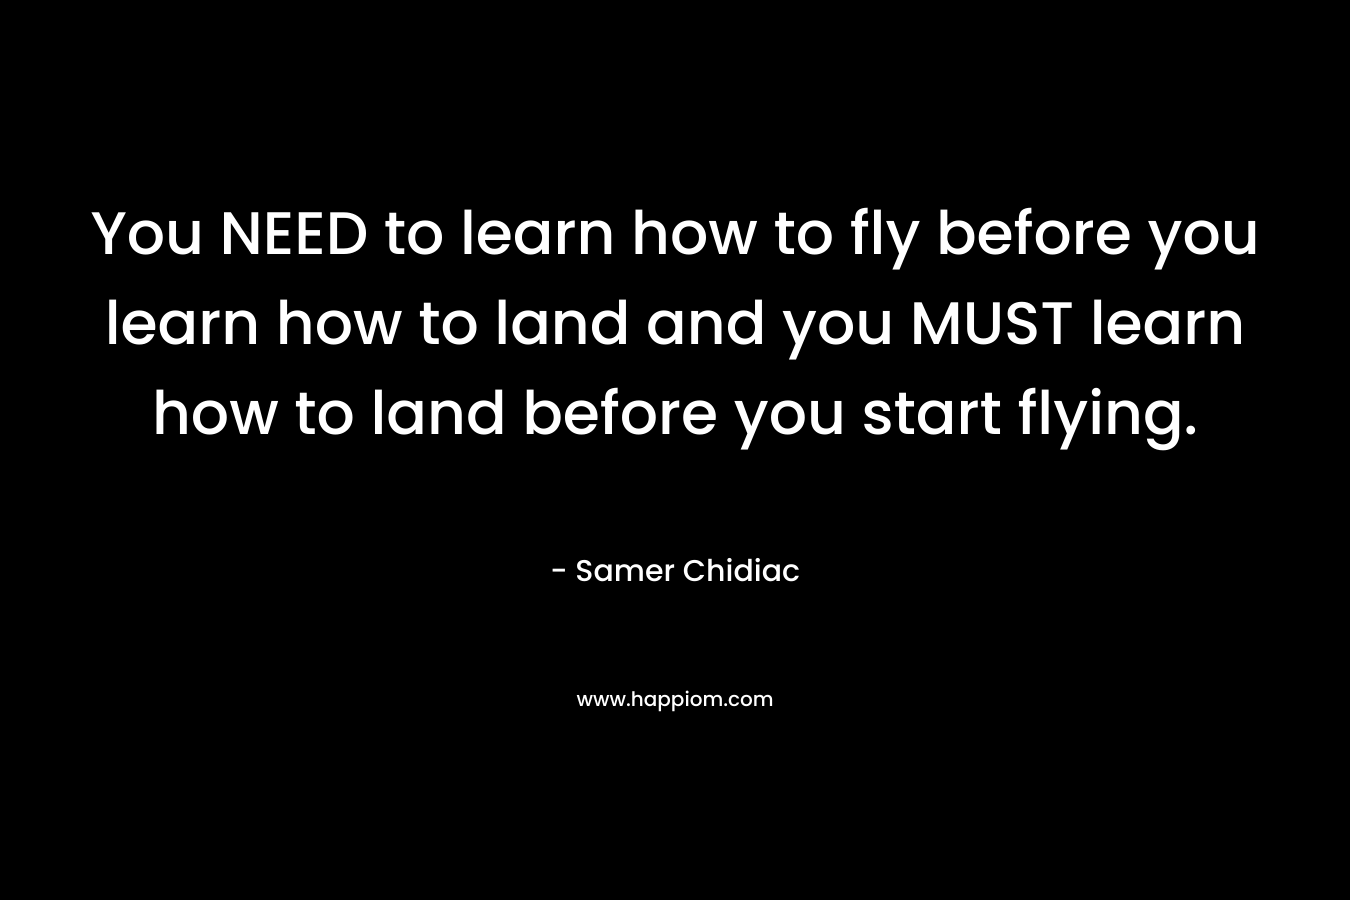 You NEED to learn how to fly before you learn how to land and you MUST learn how to land before you start flying. – Samer Chidiac